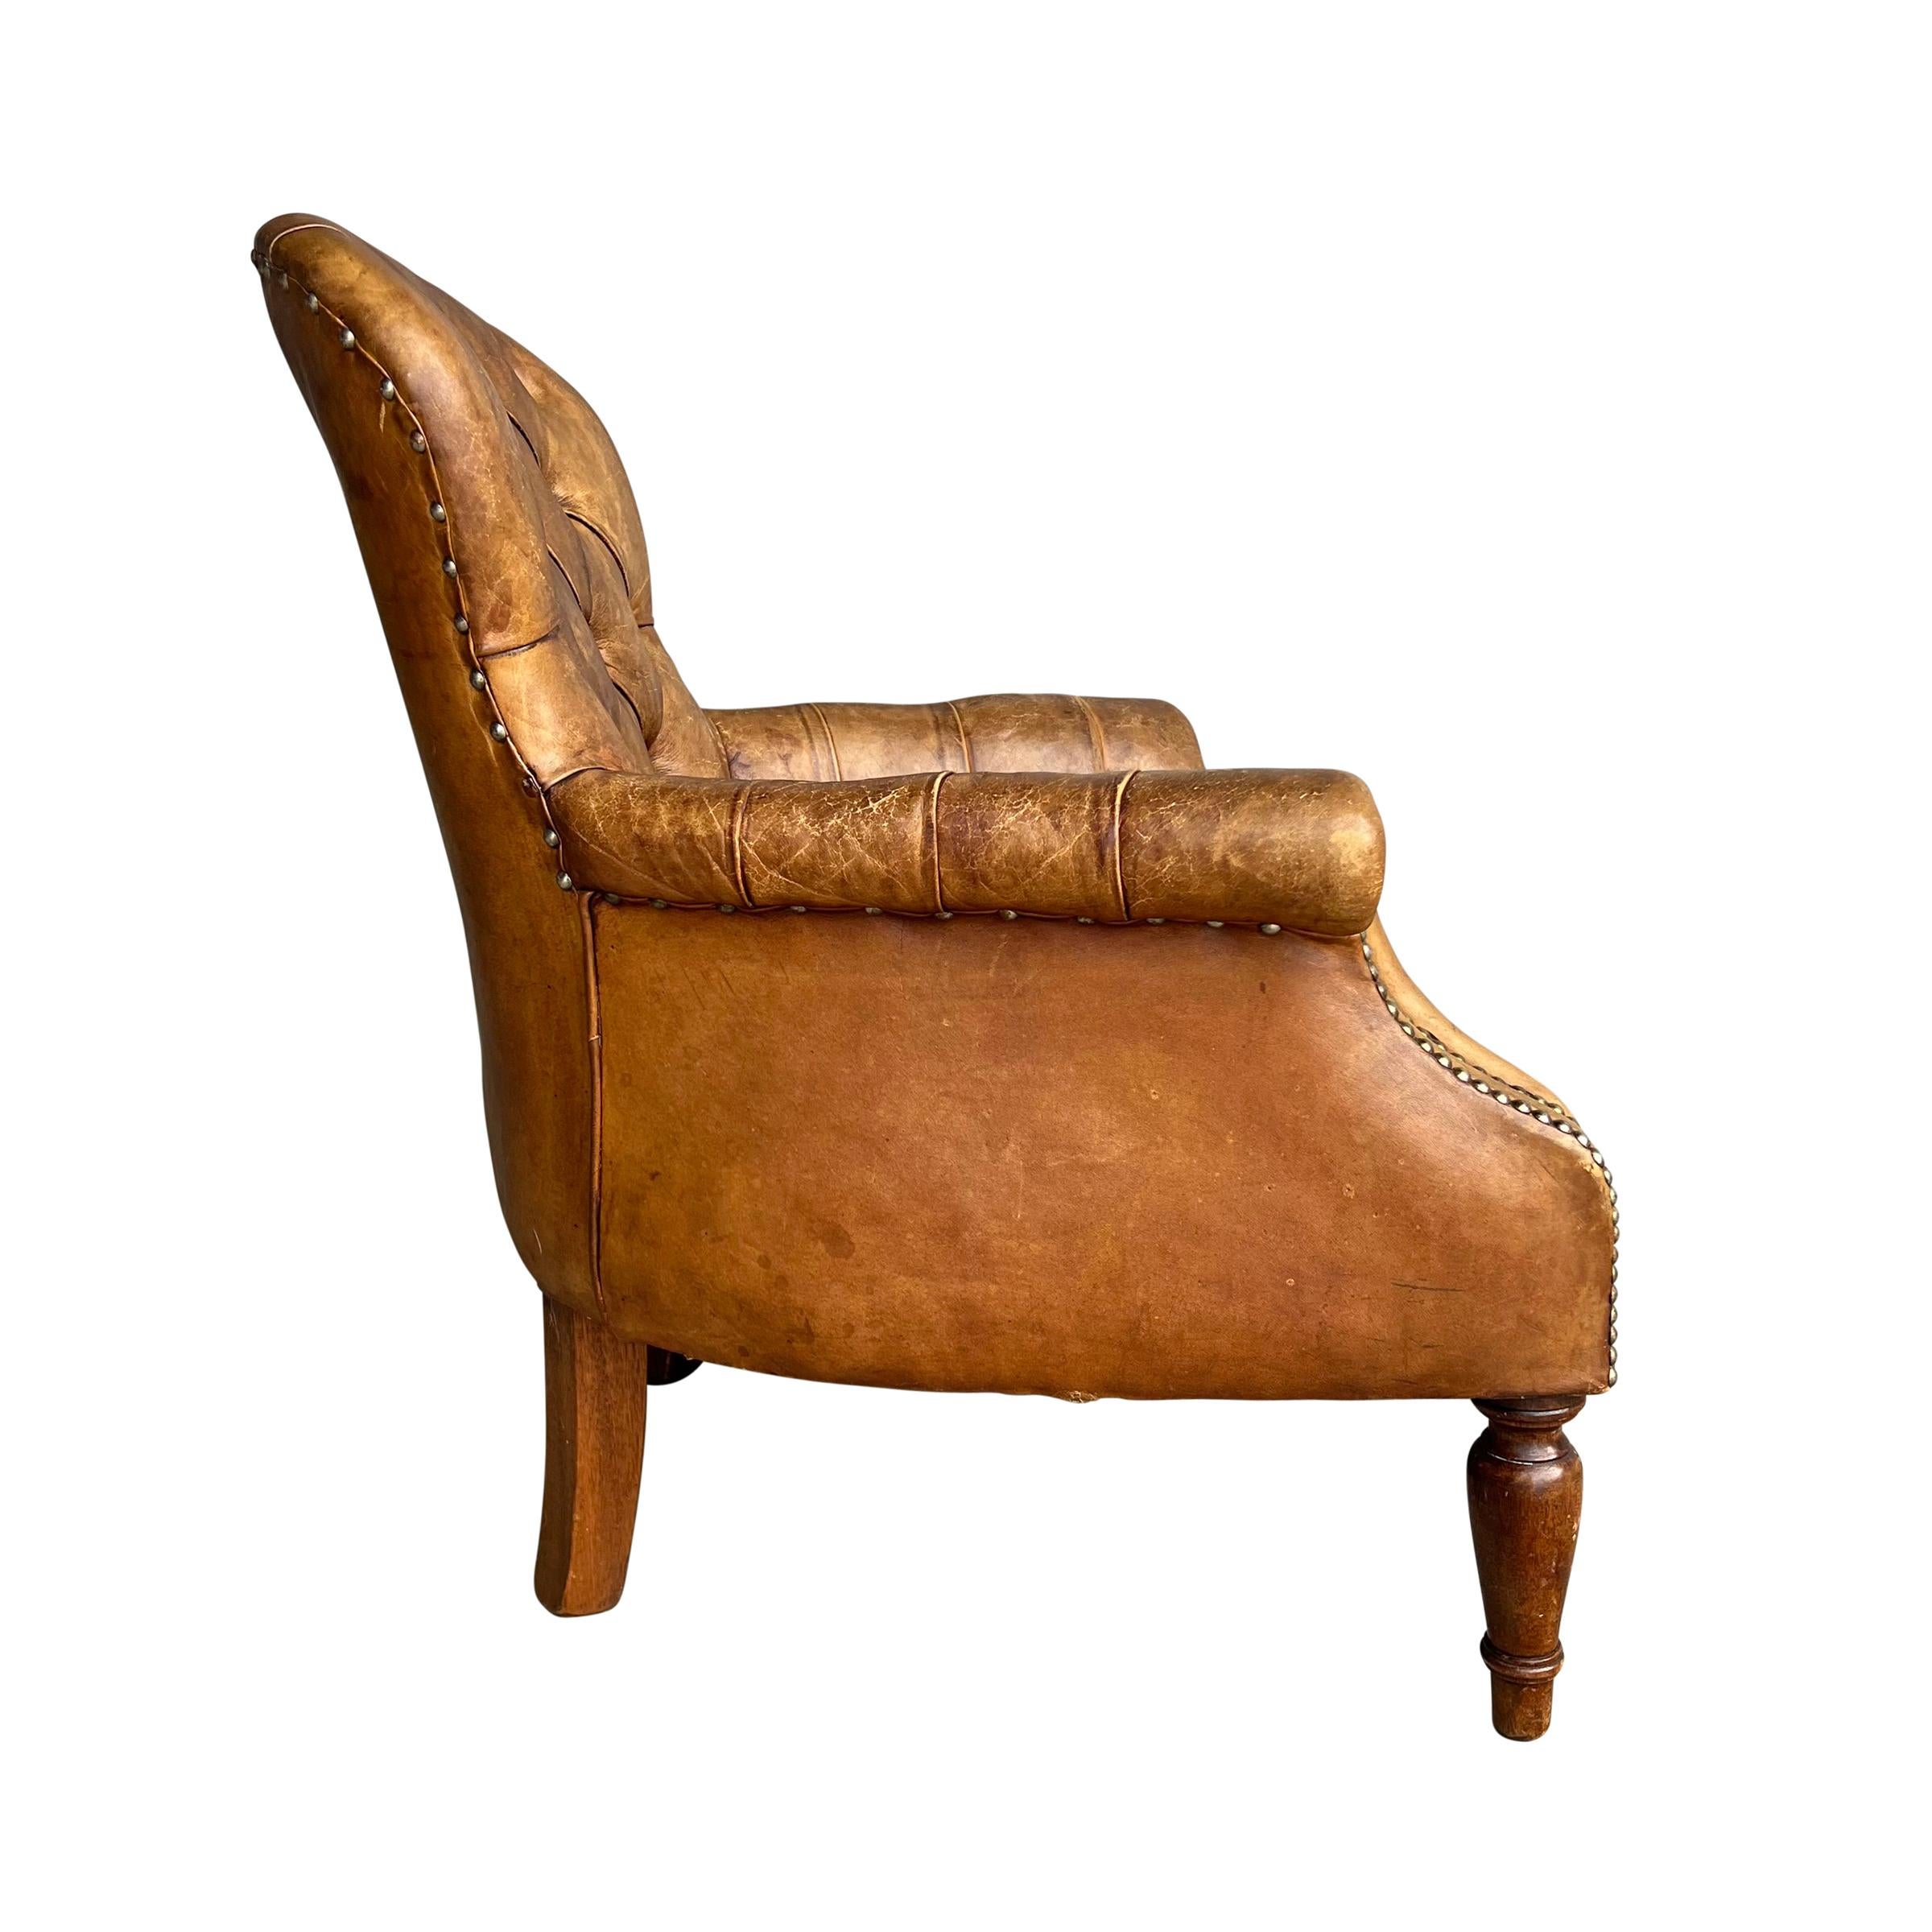 Early 20th Century French Napoleon III-Style Chair 1